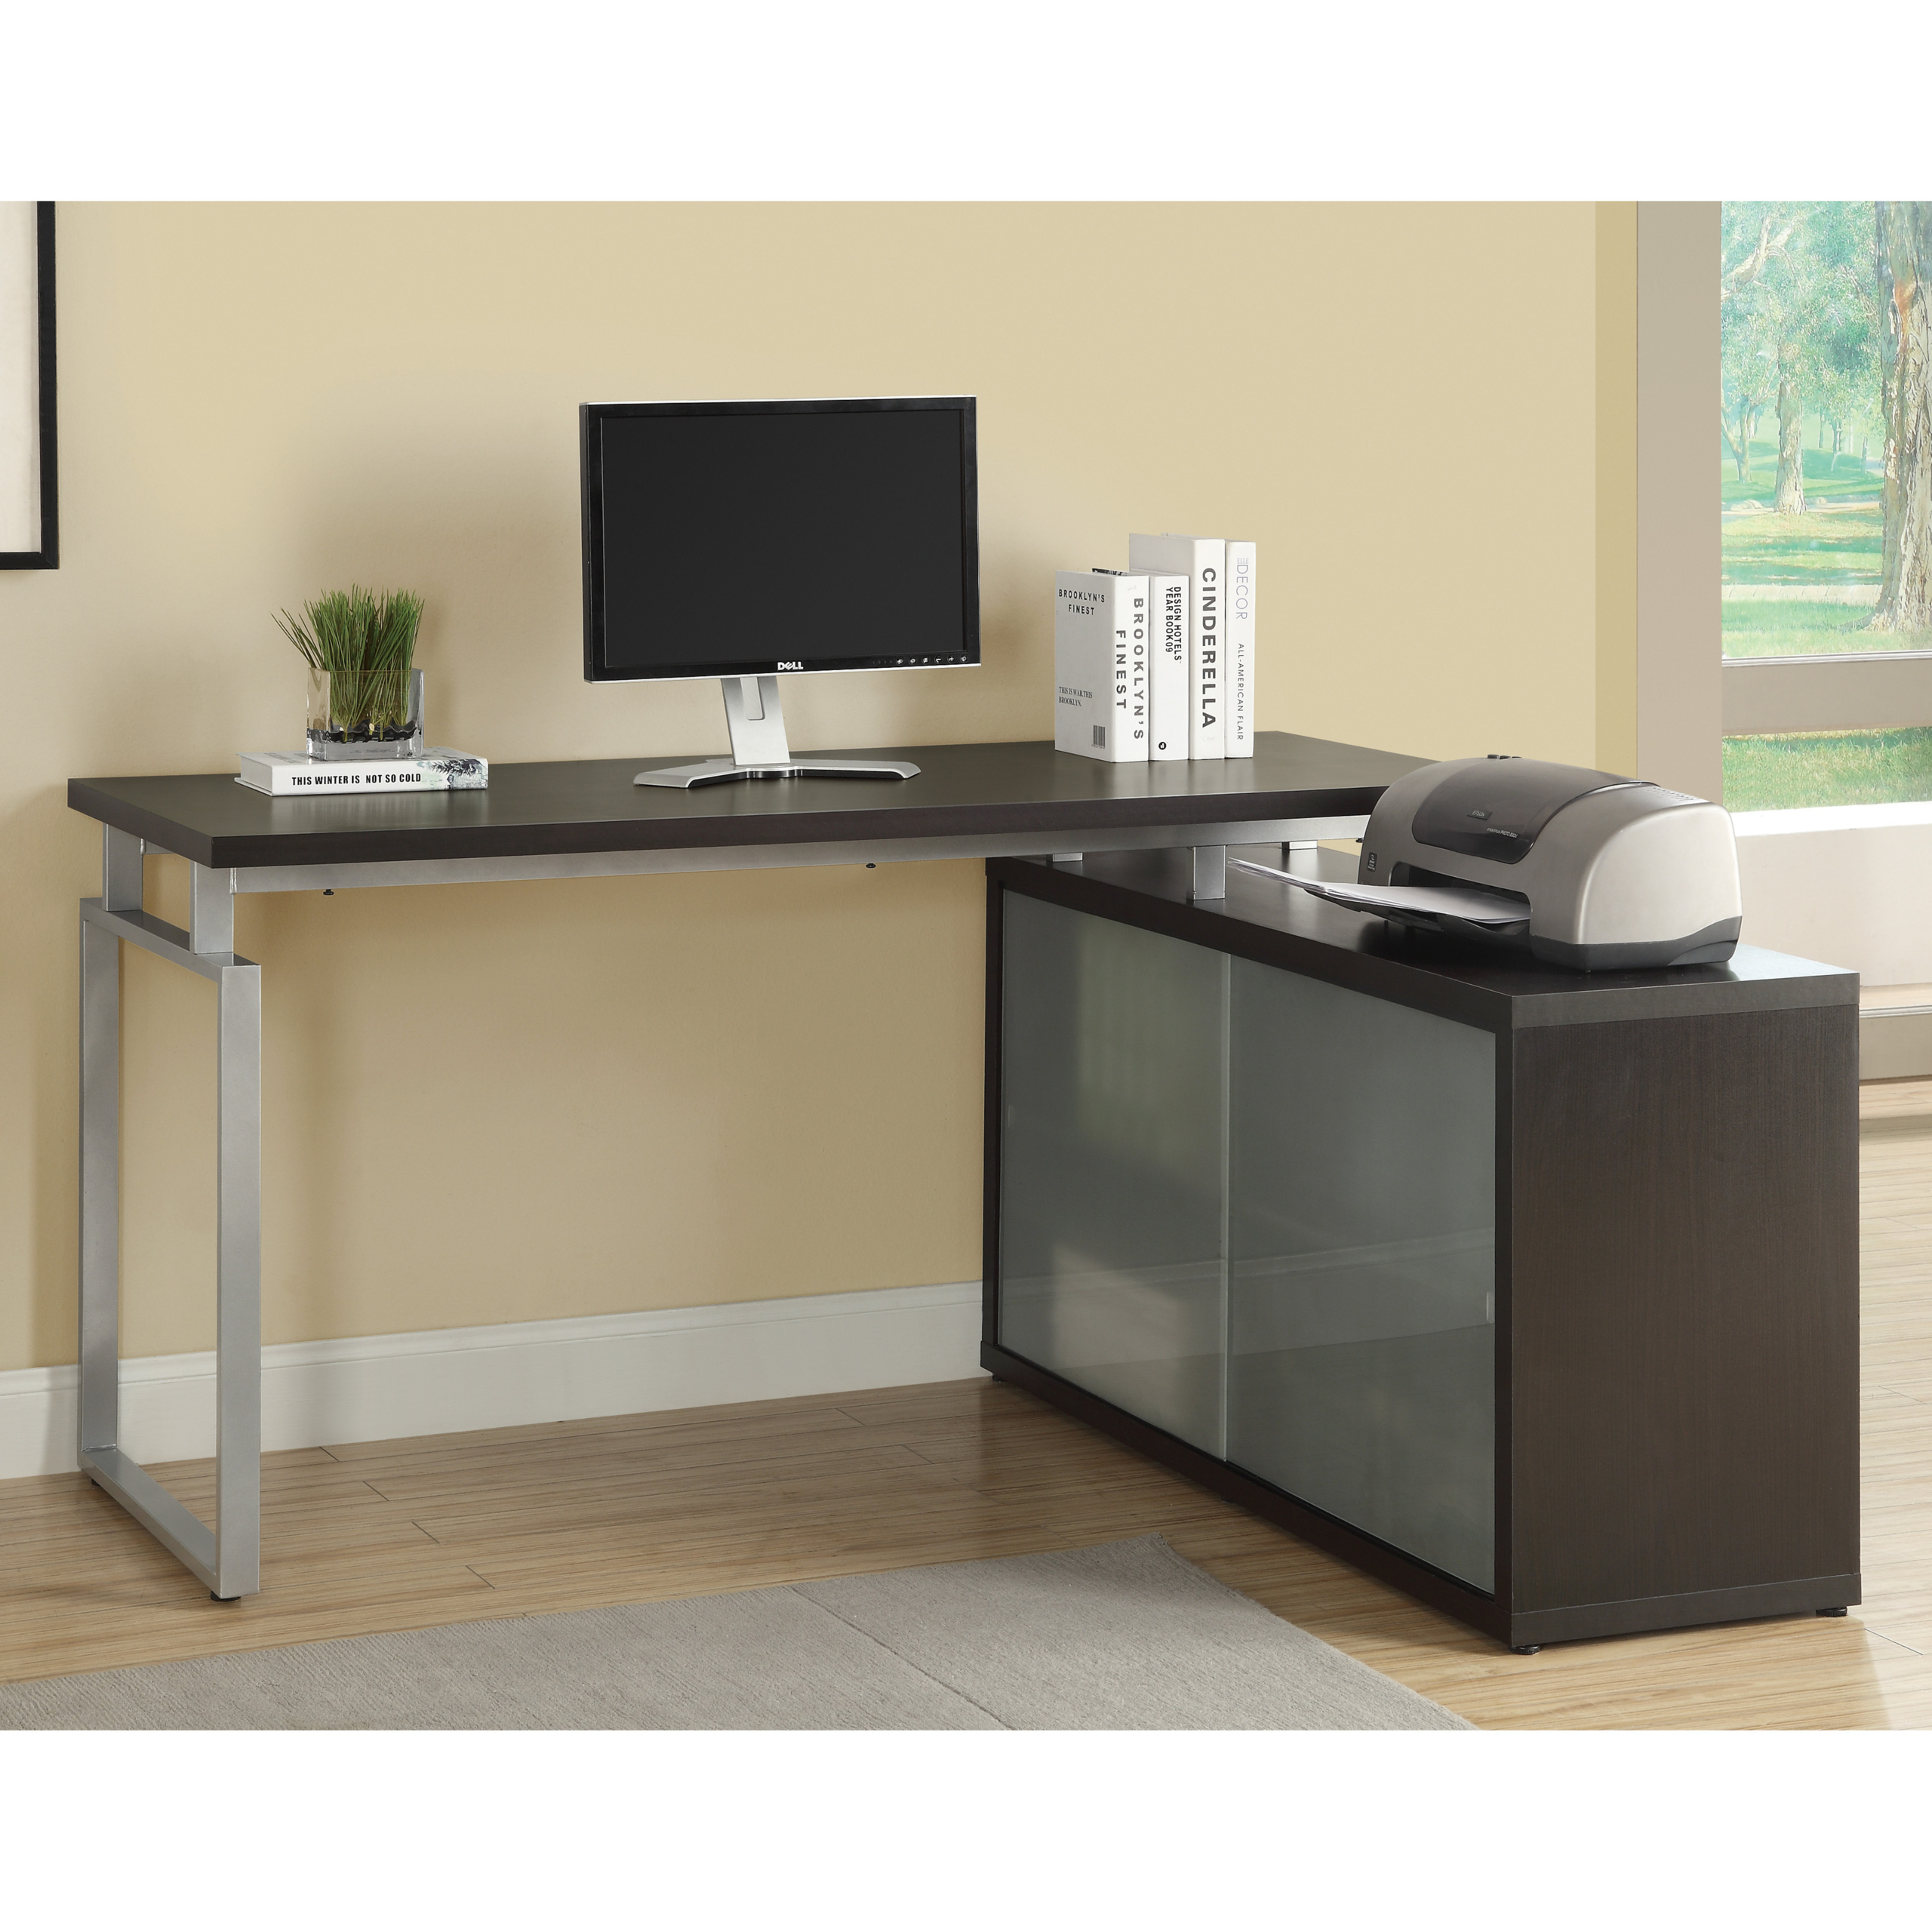 Monarch specialties 7035 l shaped desk w frosted glass in